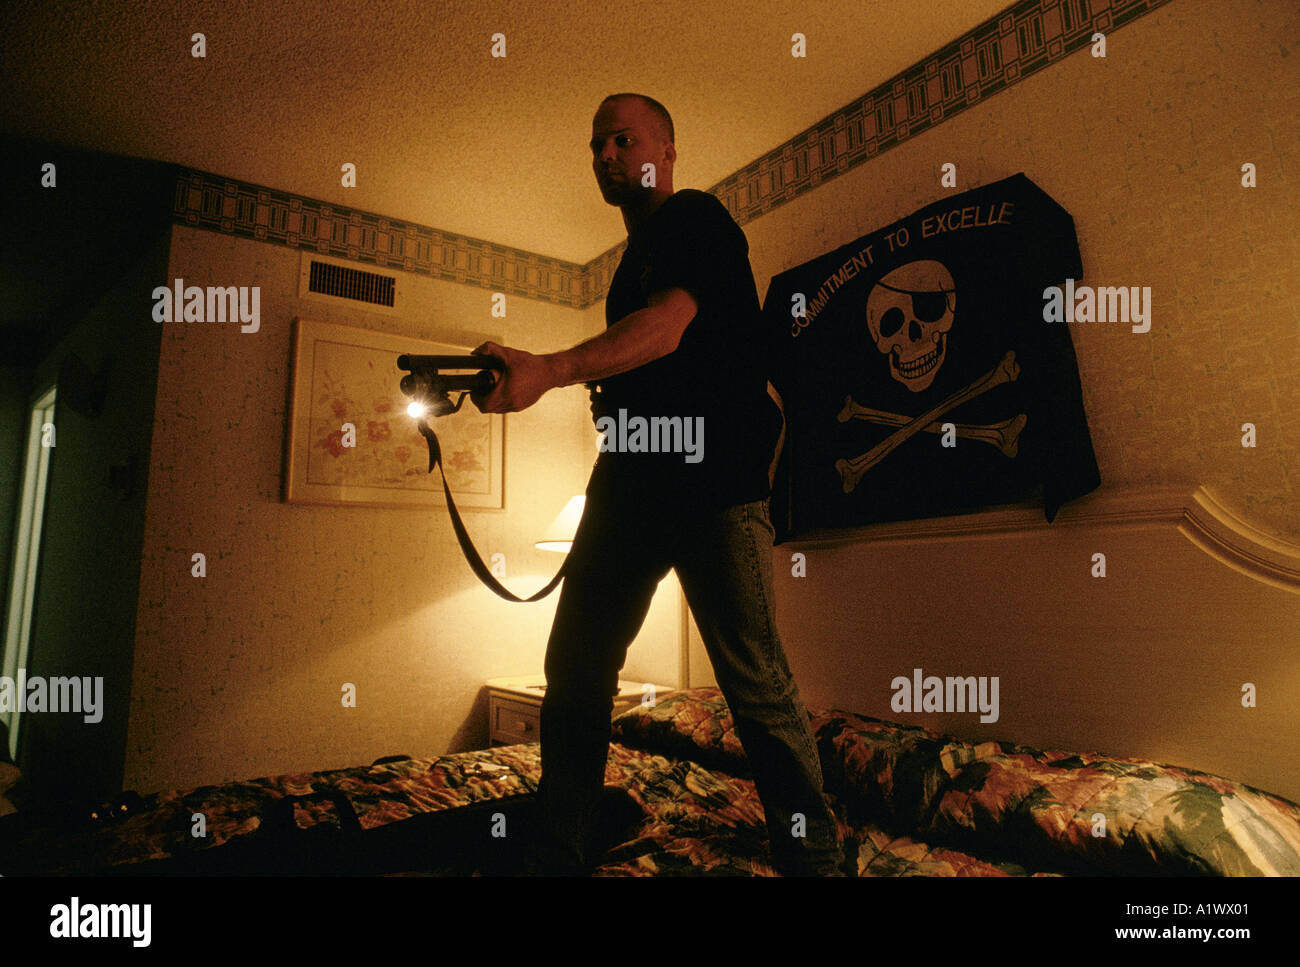 SOLDIERS OF FORTUNE CONVENTIONEER IN HIS HOTEL ROOM PLAYING WITH THE GUNS HE OWNS THE FLAG ABOVE THE BED IS OF HIS DESIGN THE SLOGAN READS commitment to excellence the 15th anniversary of soldier of fortune magazine annual convention sands hotel las vegas 1994 Stock Photo